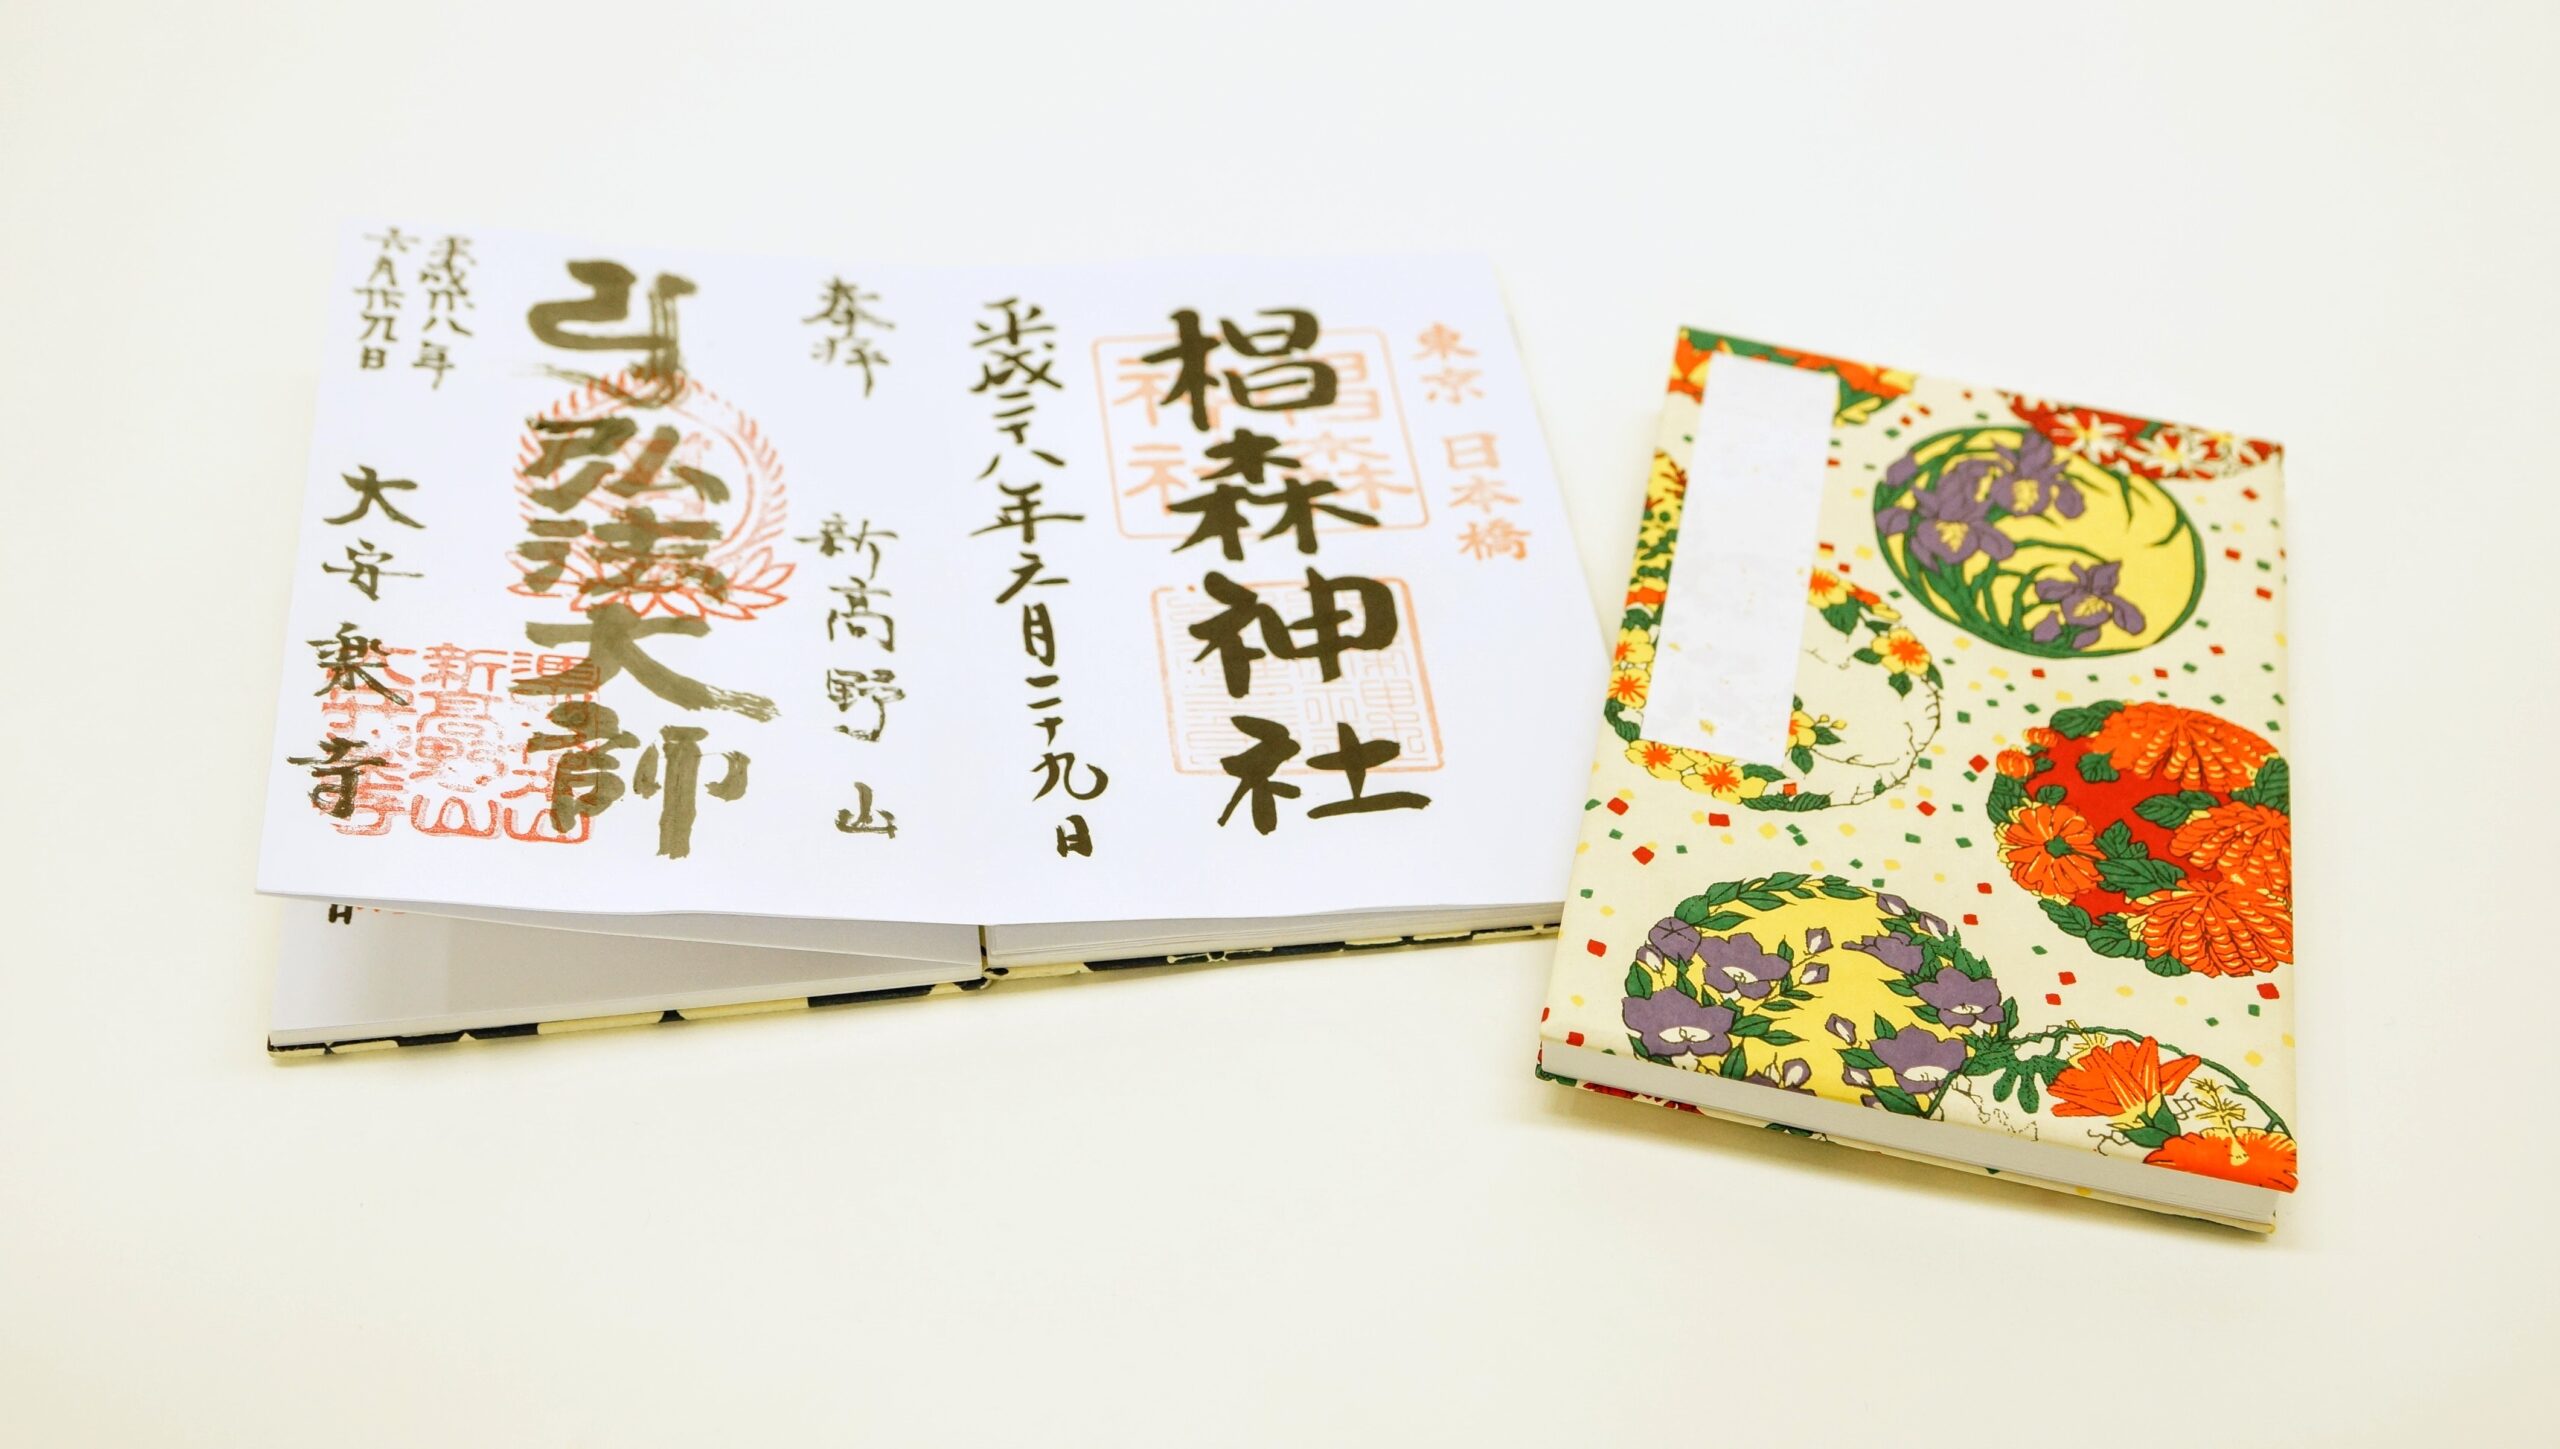 Special Books for Collecting Stamps from Japanese Temples and